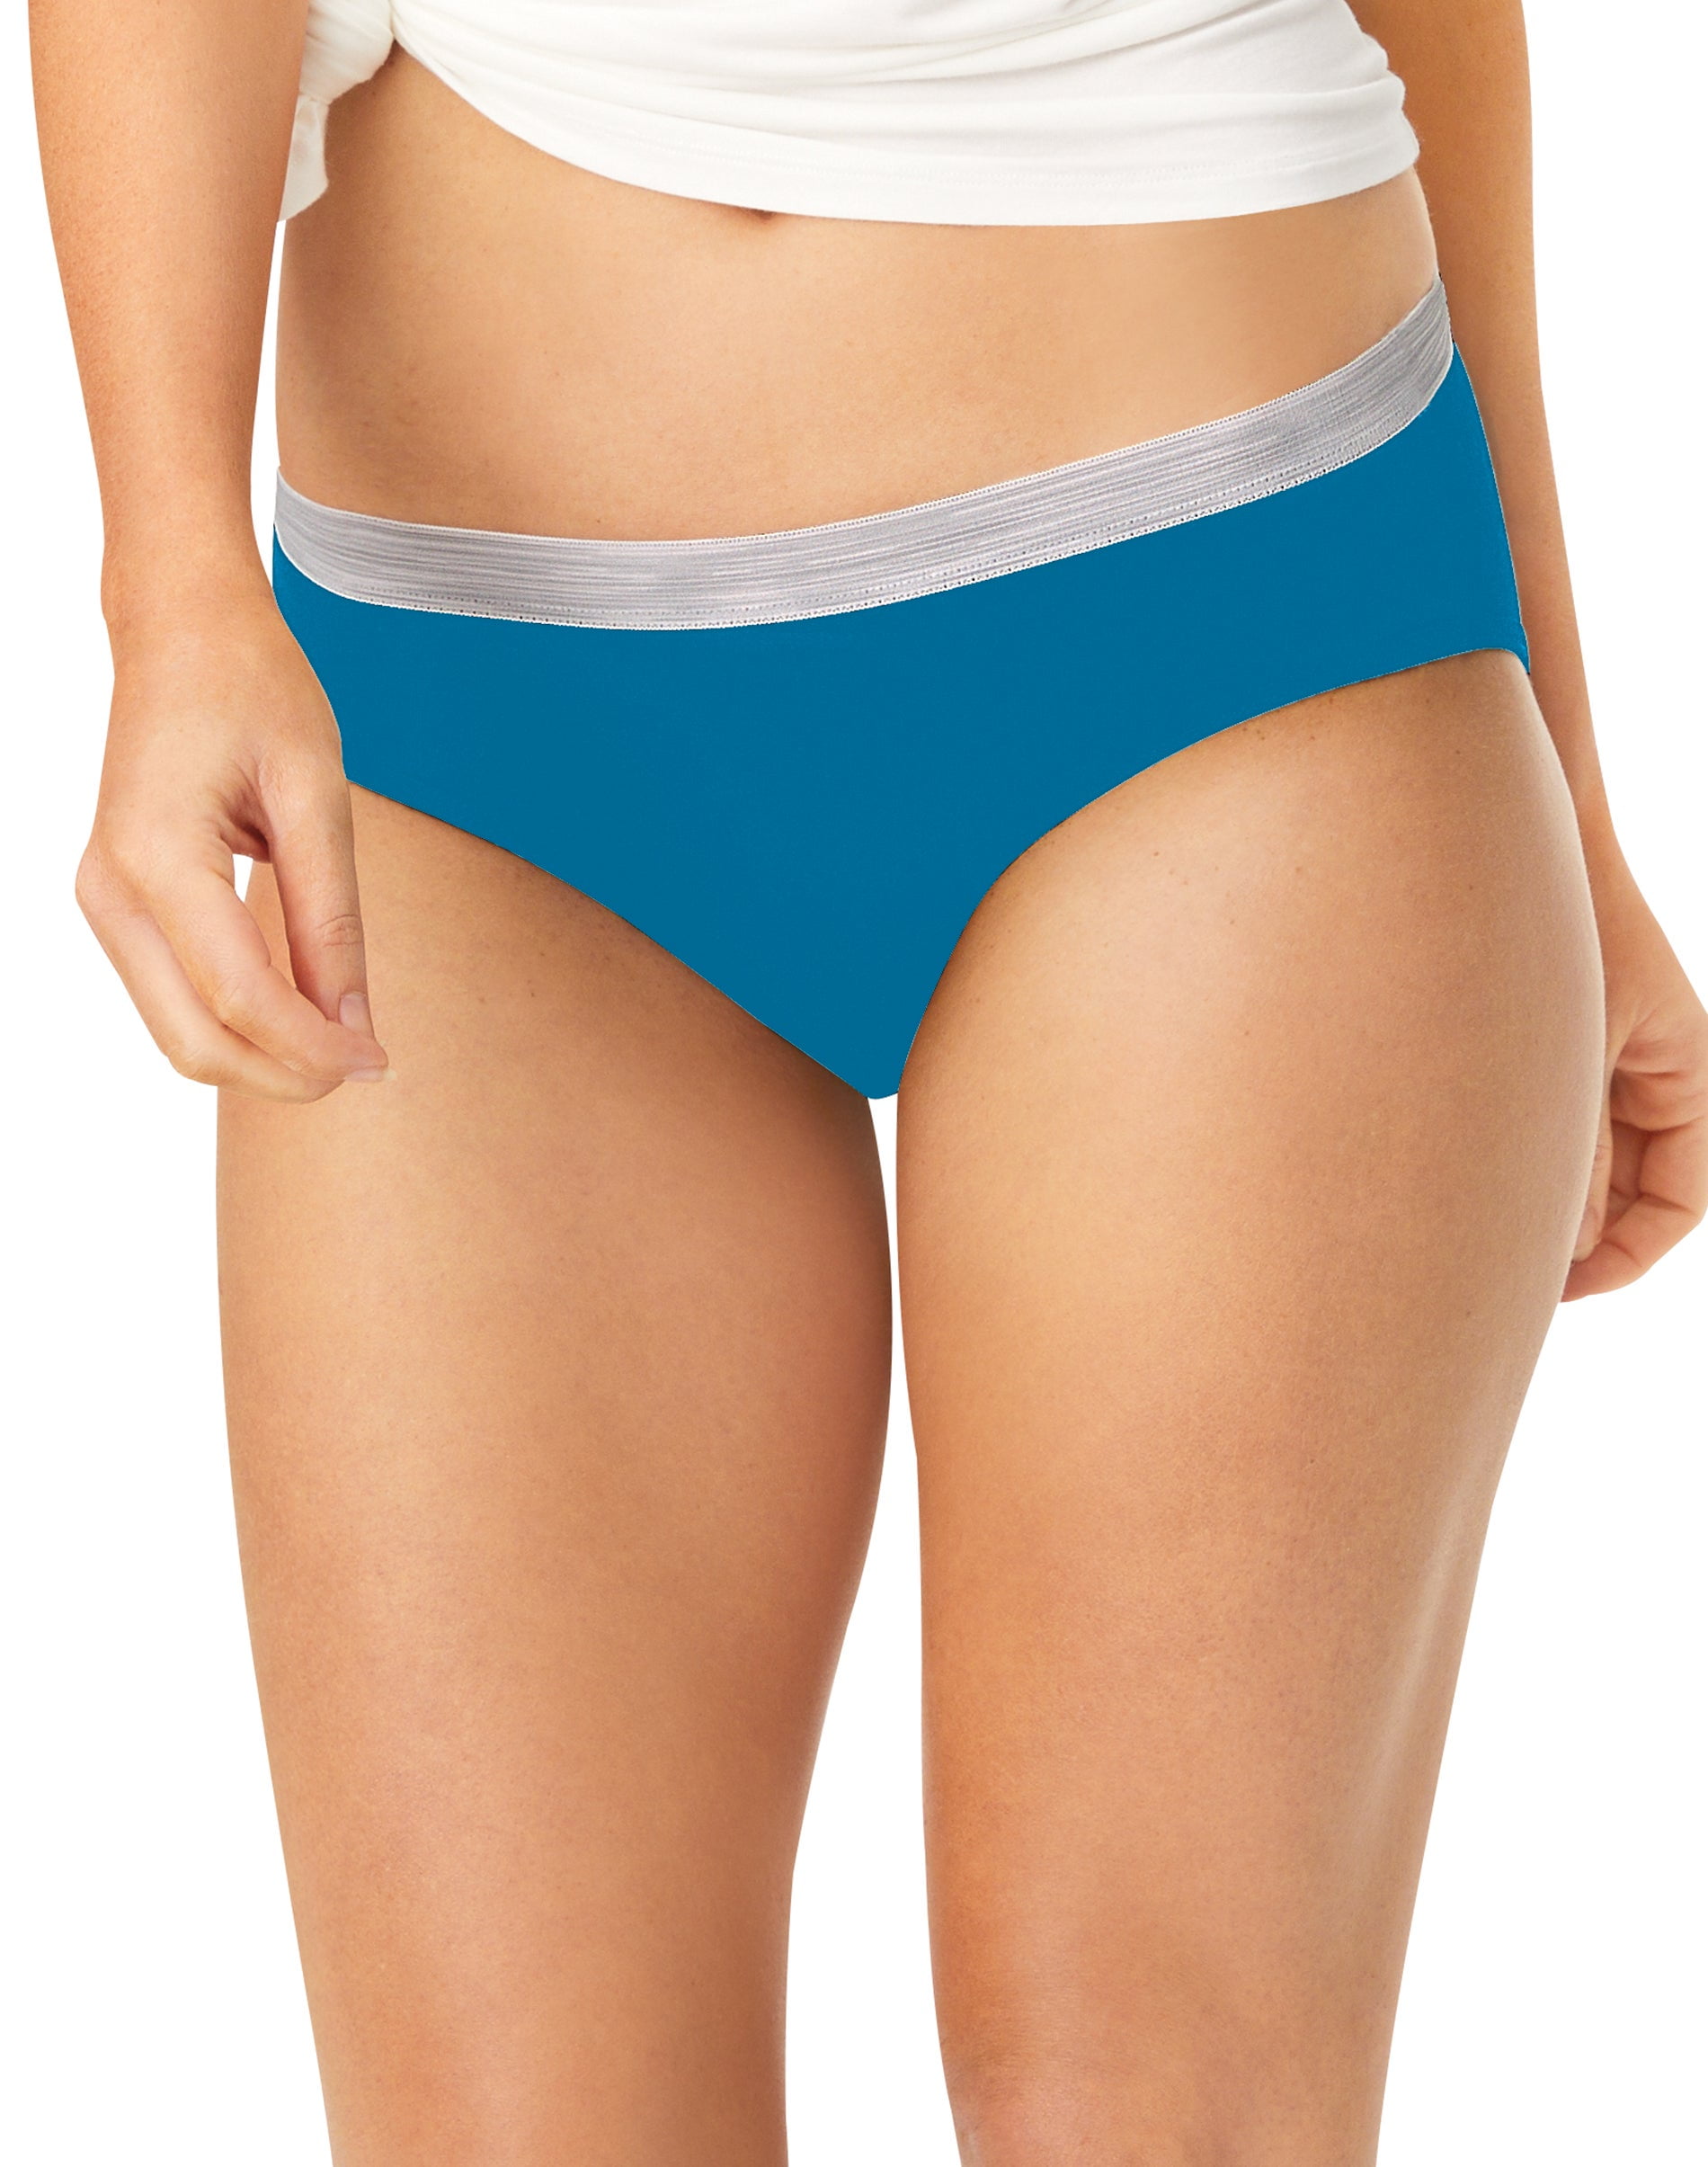 Hanes Women's 6pk Cotton Ribbed Heather Hipster Underwear - Colors May Vary  6 : Target